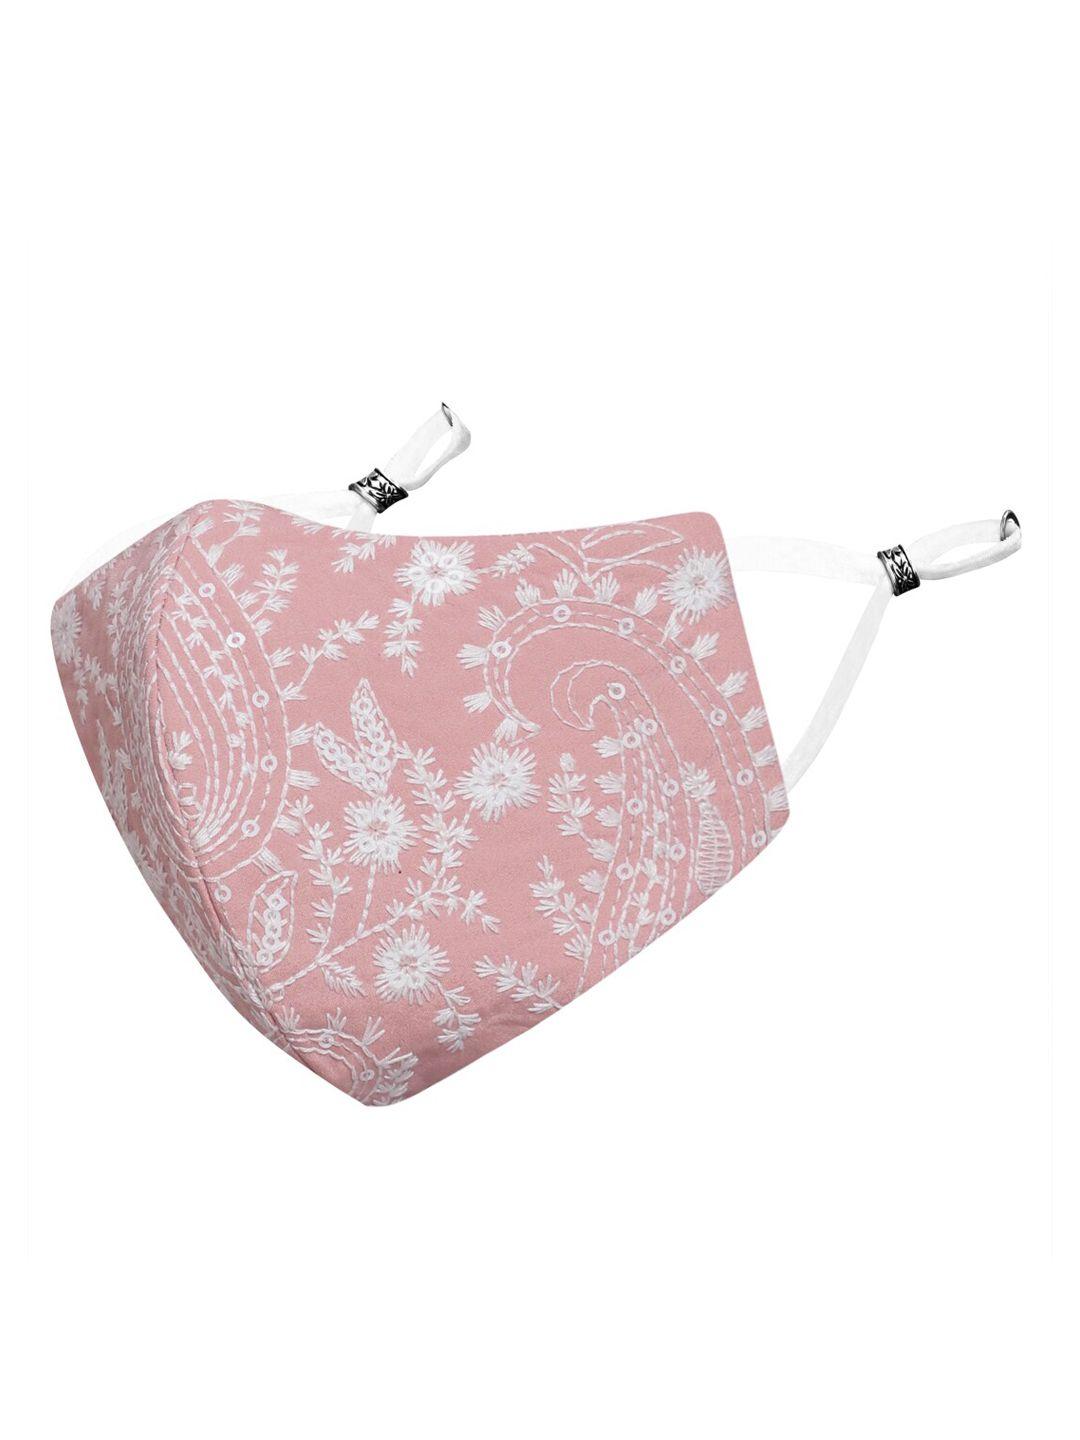 masq-pink-&-white-embroidered-4-ply-reusable-anti-pollution-cloth-mask